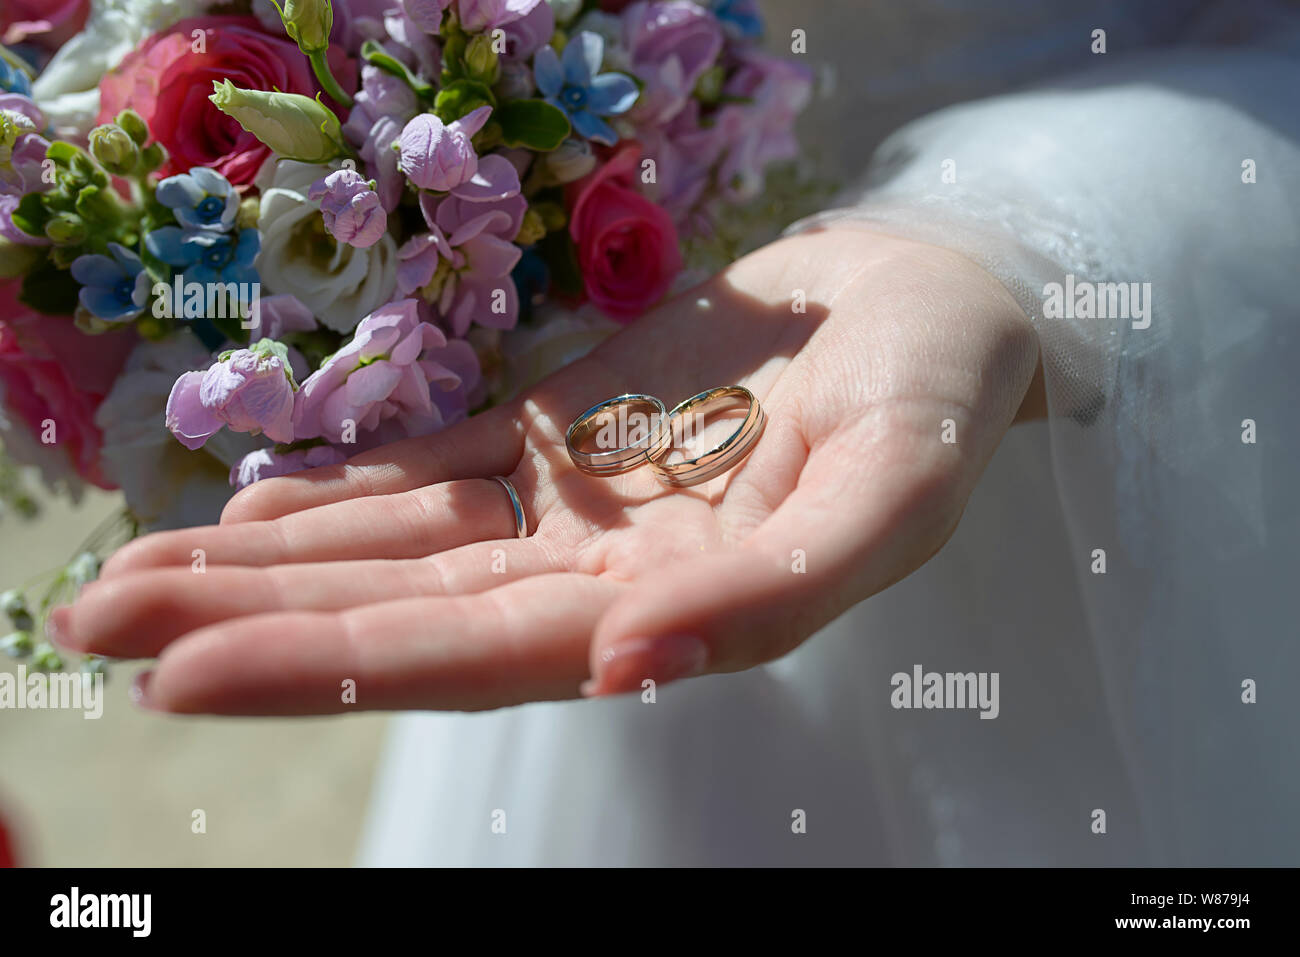 Bride at the wedding ceremony with focus on hands, in one hand holding a summer mixed flowers bouquet and in the other the wedding rings Stock Photo